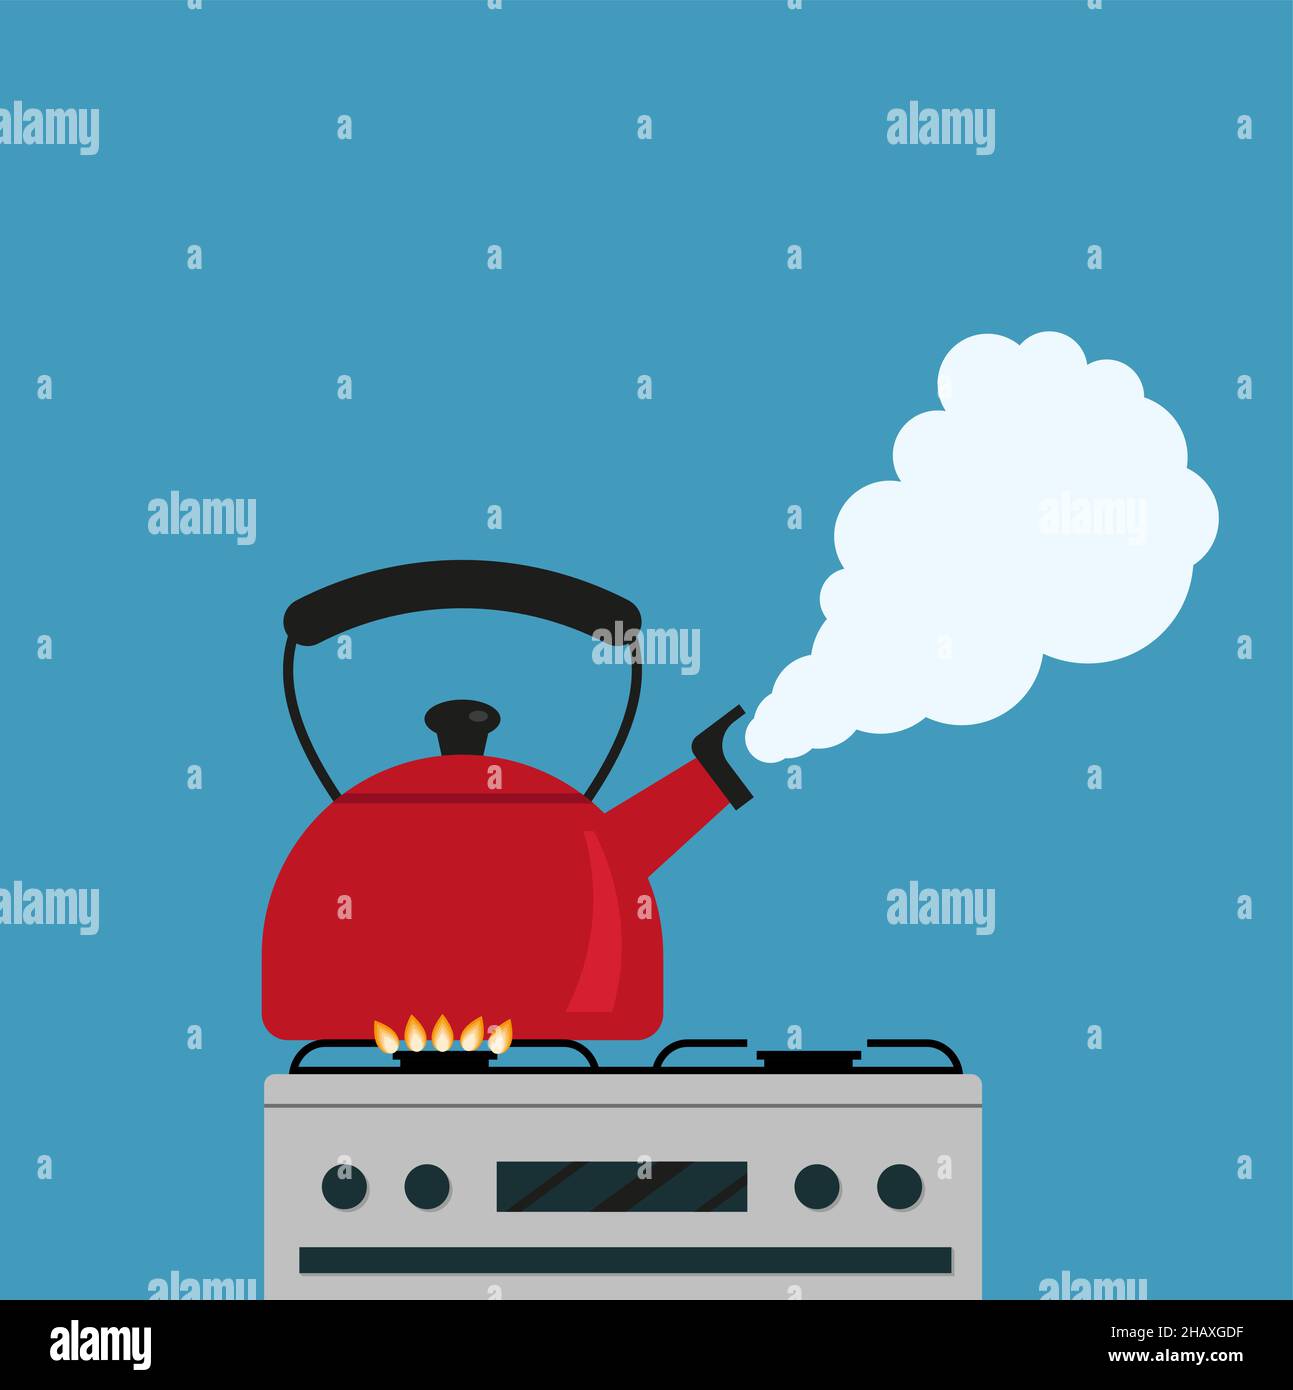 https://c8.alamy.com/comp/2HAXGDF/a-boiling-kettle-on-a-gas-stove-vector-illustration-in-flat-style-eps-10-2HAXGDF.jpg